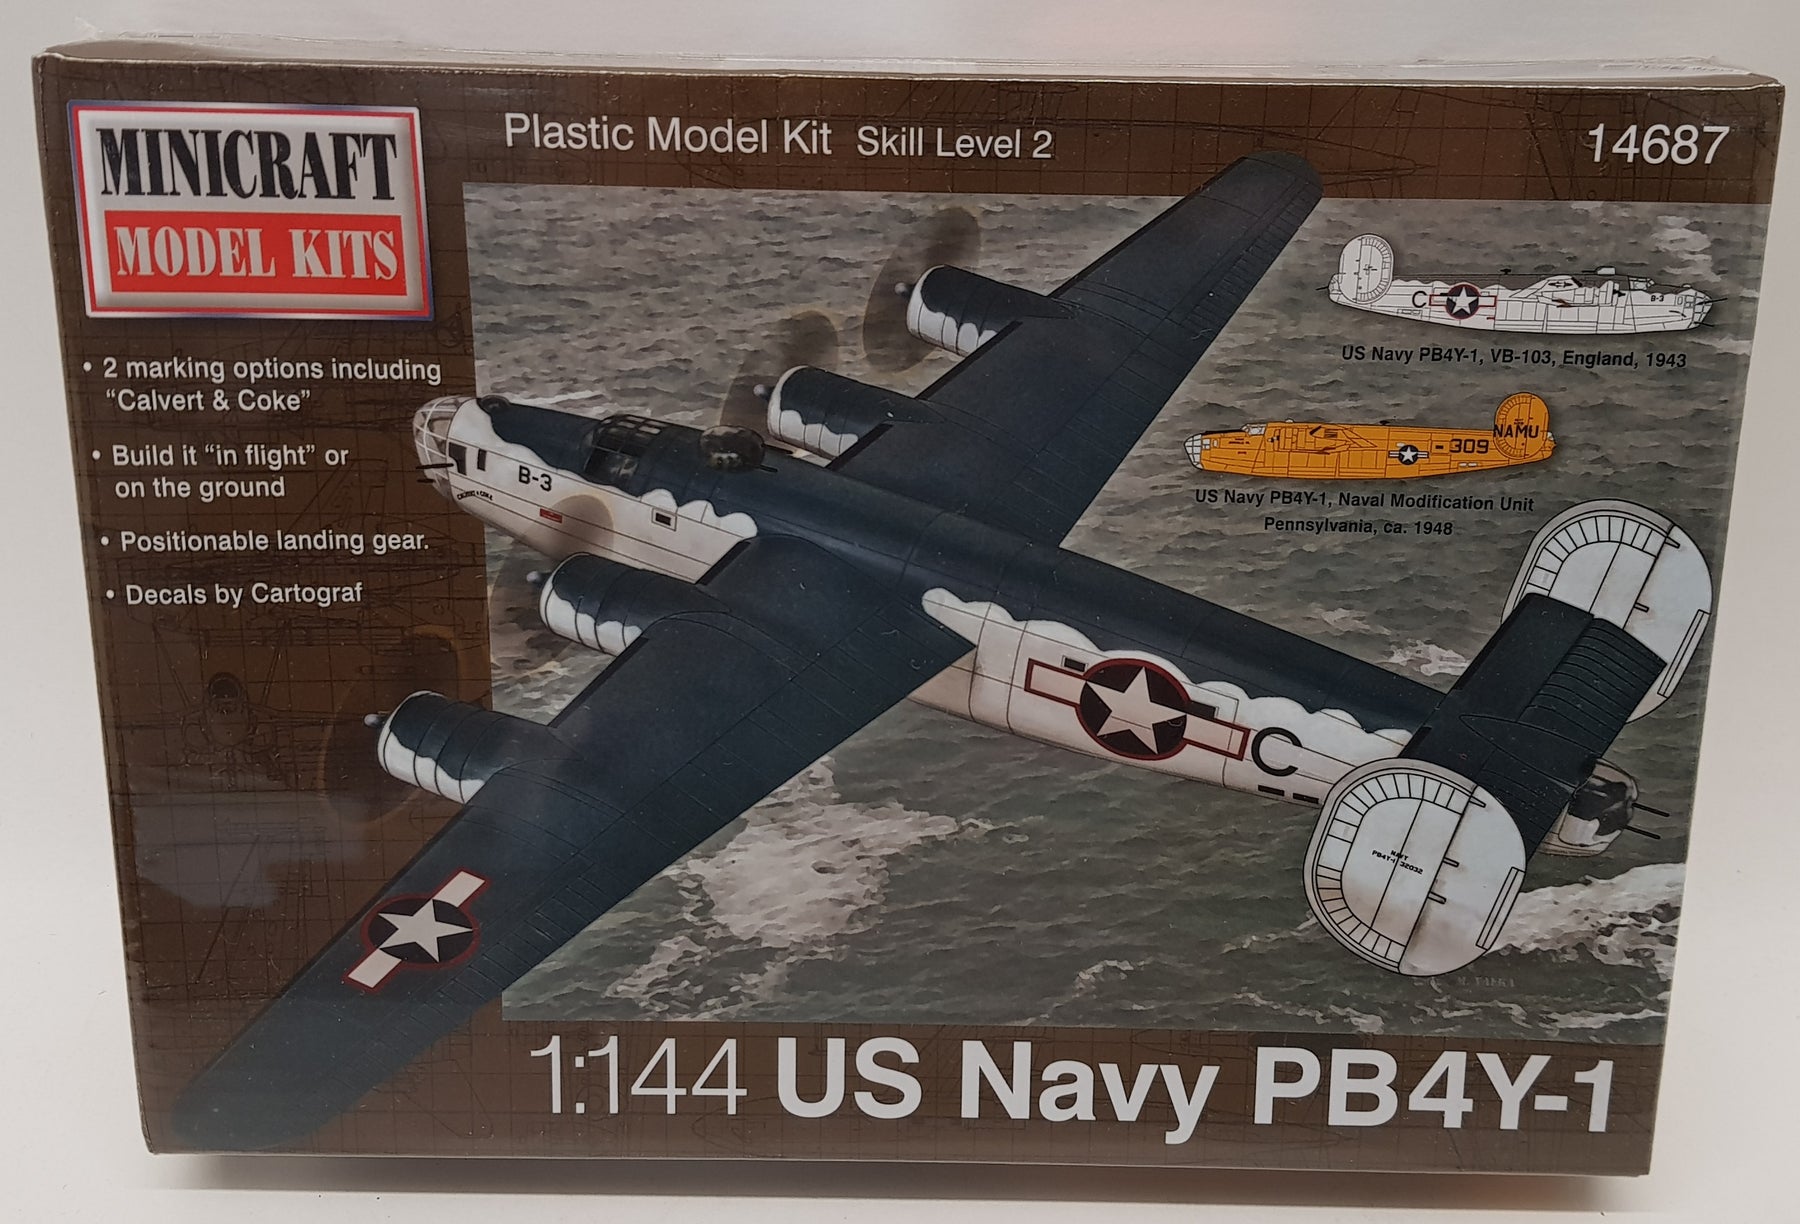 Minicraft Model Aircraft Kit 14687 - 1/144 Scale US Navy PB4Y-1